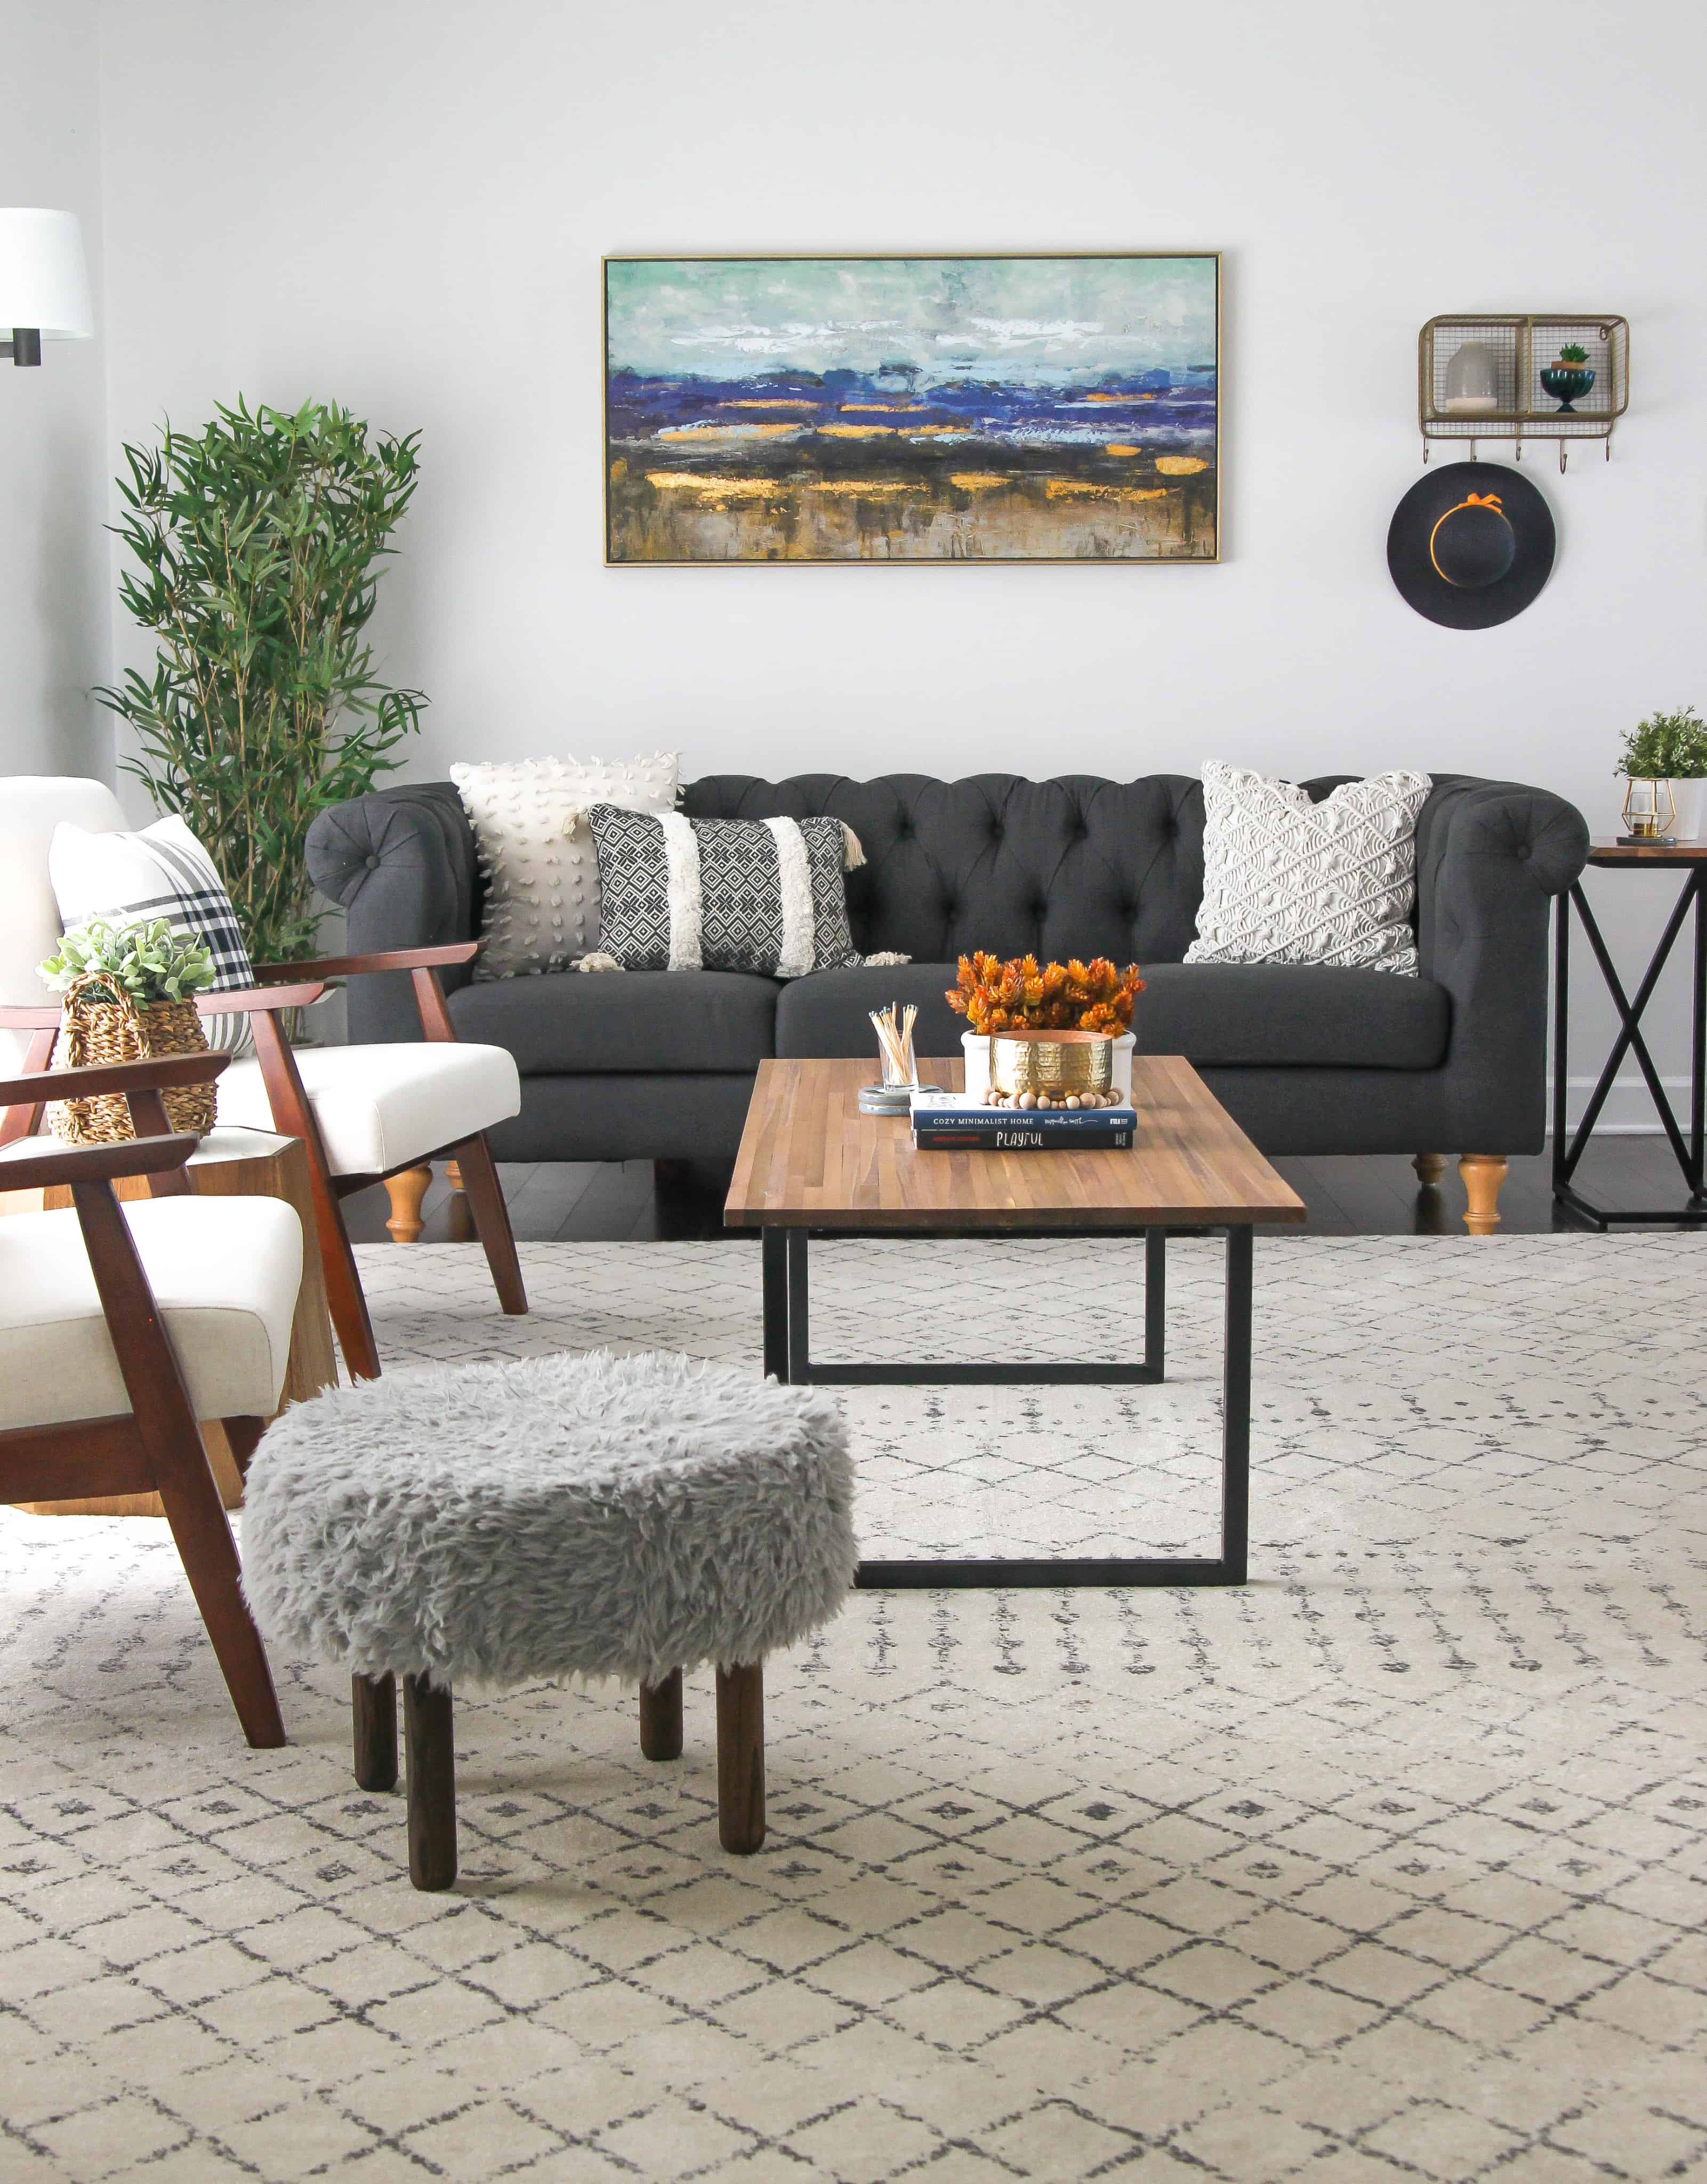 How To Create A Living Room That You and Your Guests Will Love. Simple ideas to end up with a living room that you and your guests will love. #livingroom #homedecor #interiordesign #modern #traditional #livingroomdecor #oneroomchallenge